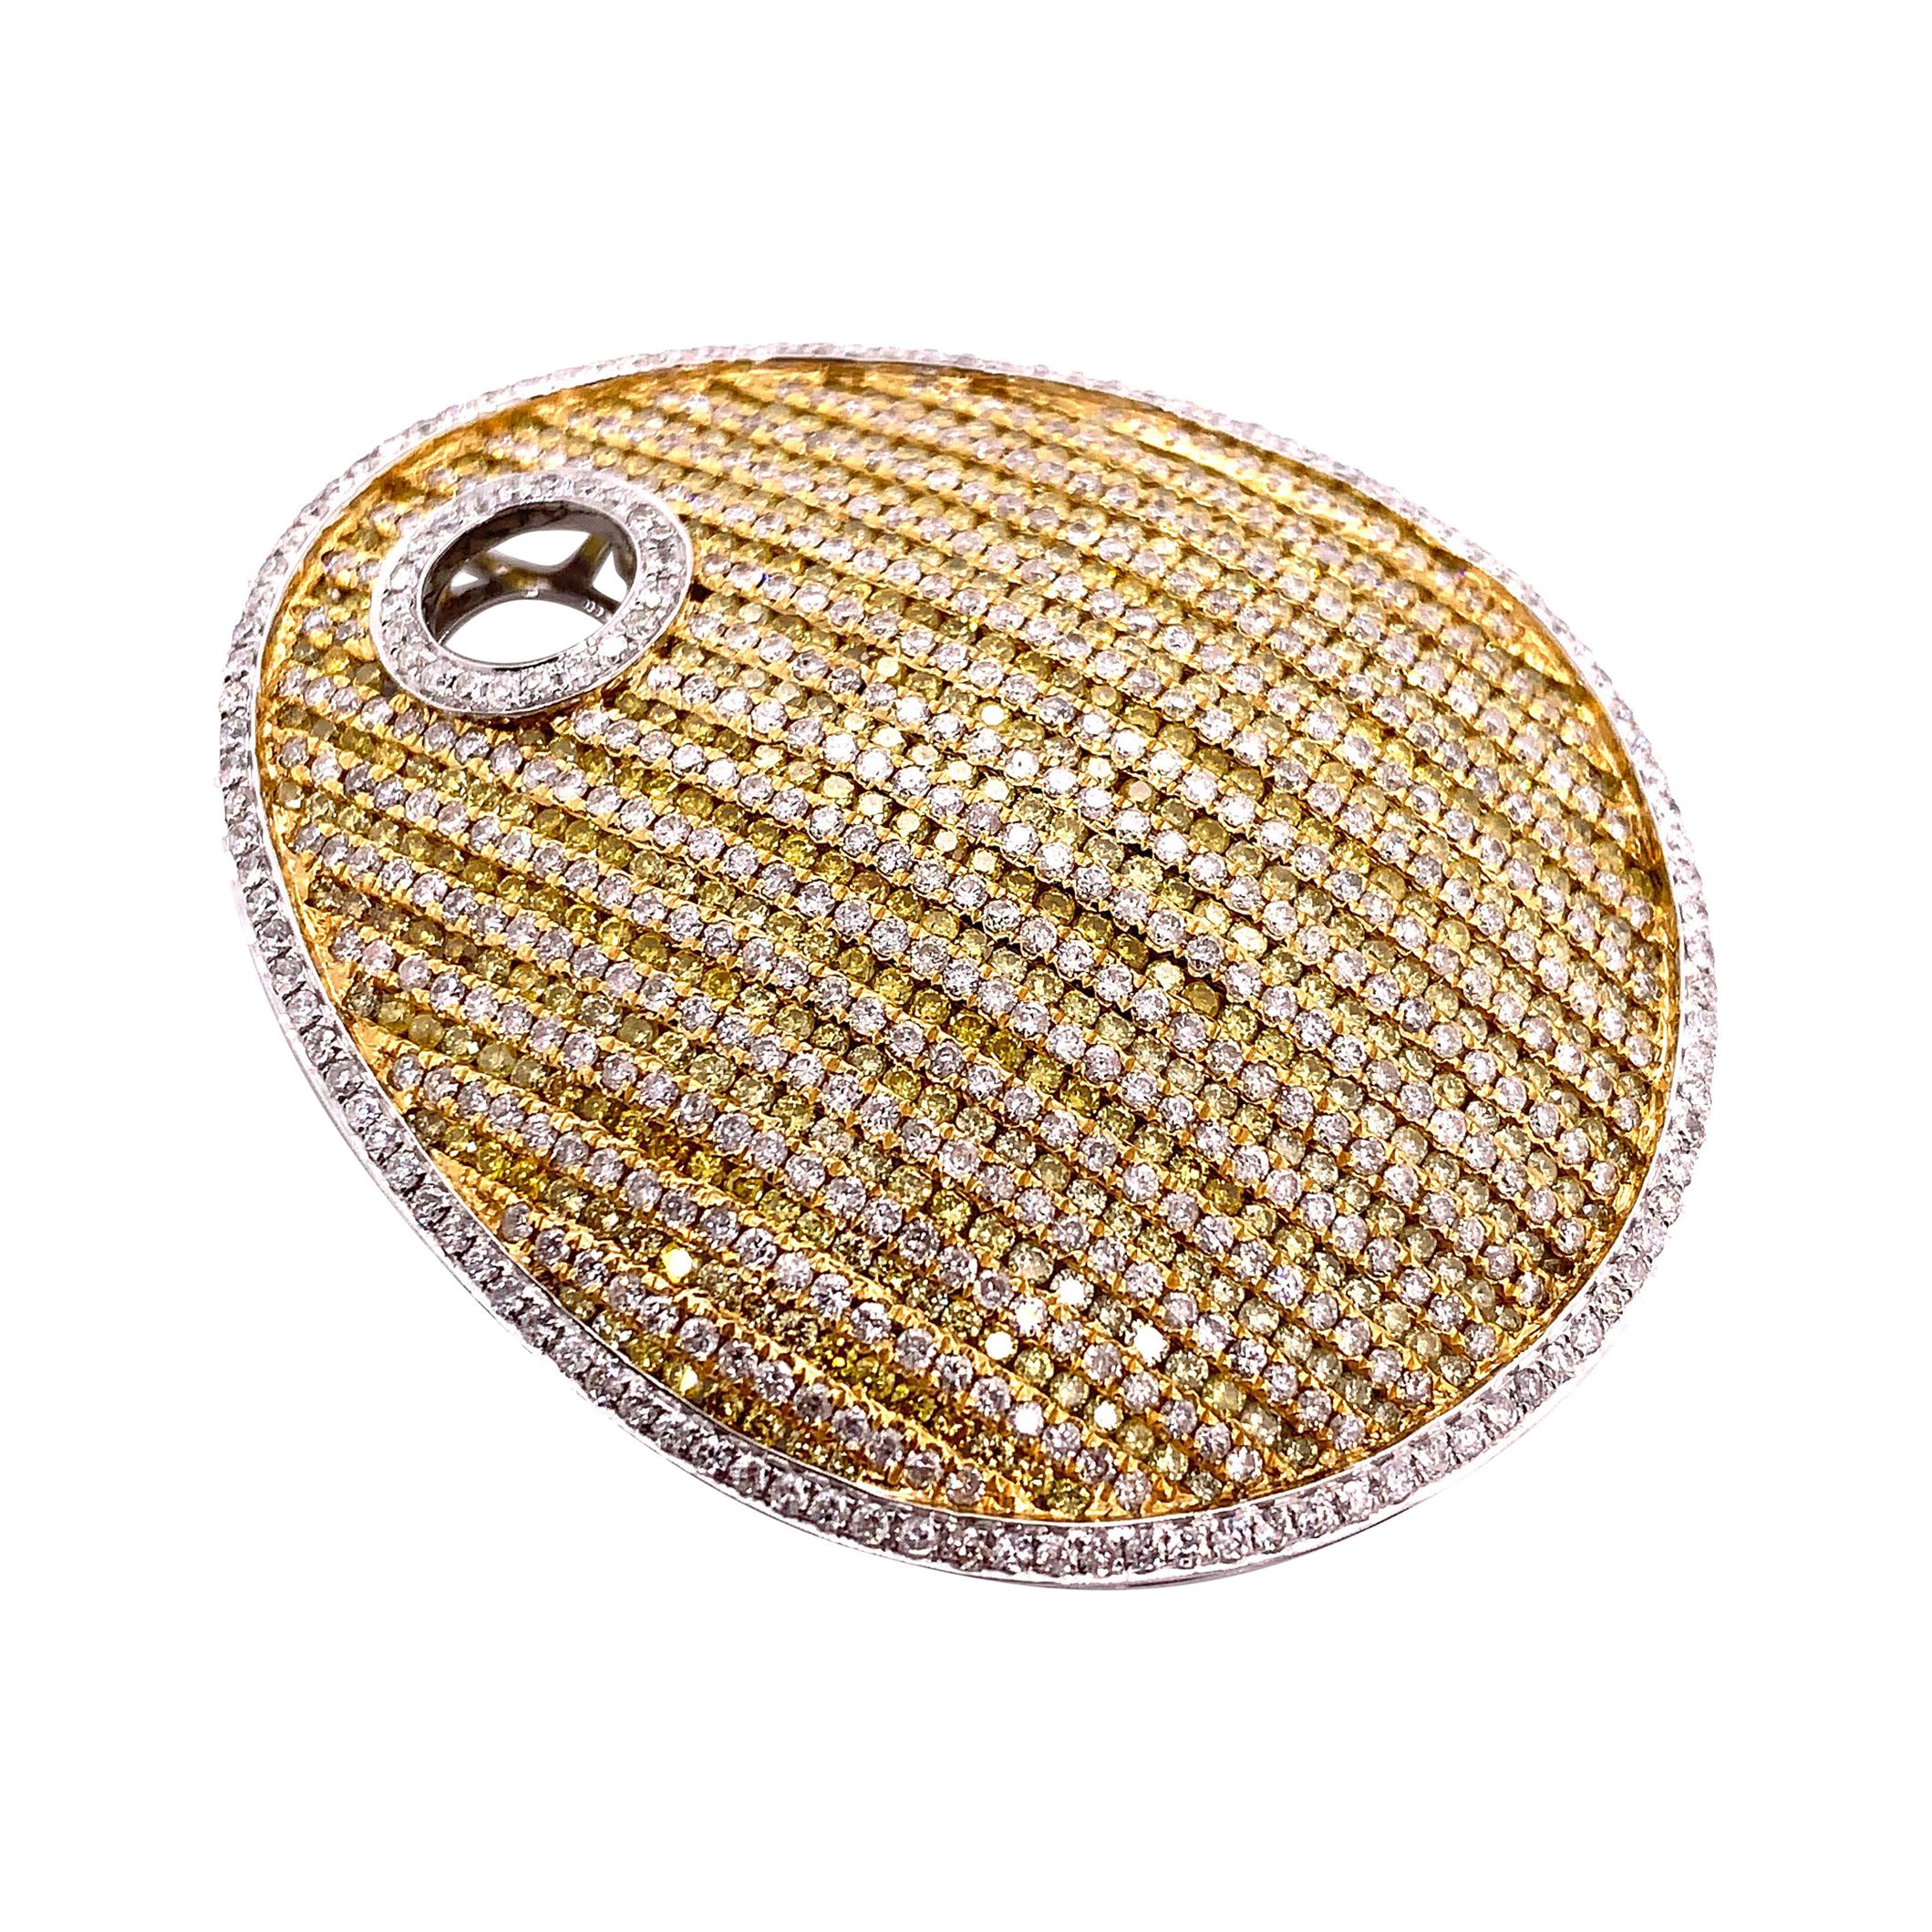 8.69 Carat Natural Fancy Yellow and White Diamond Pendant For Sale